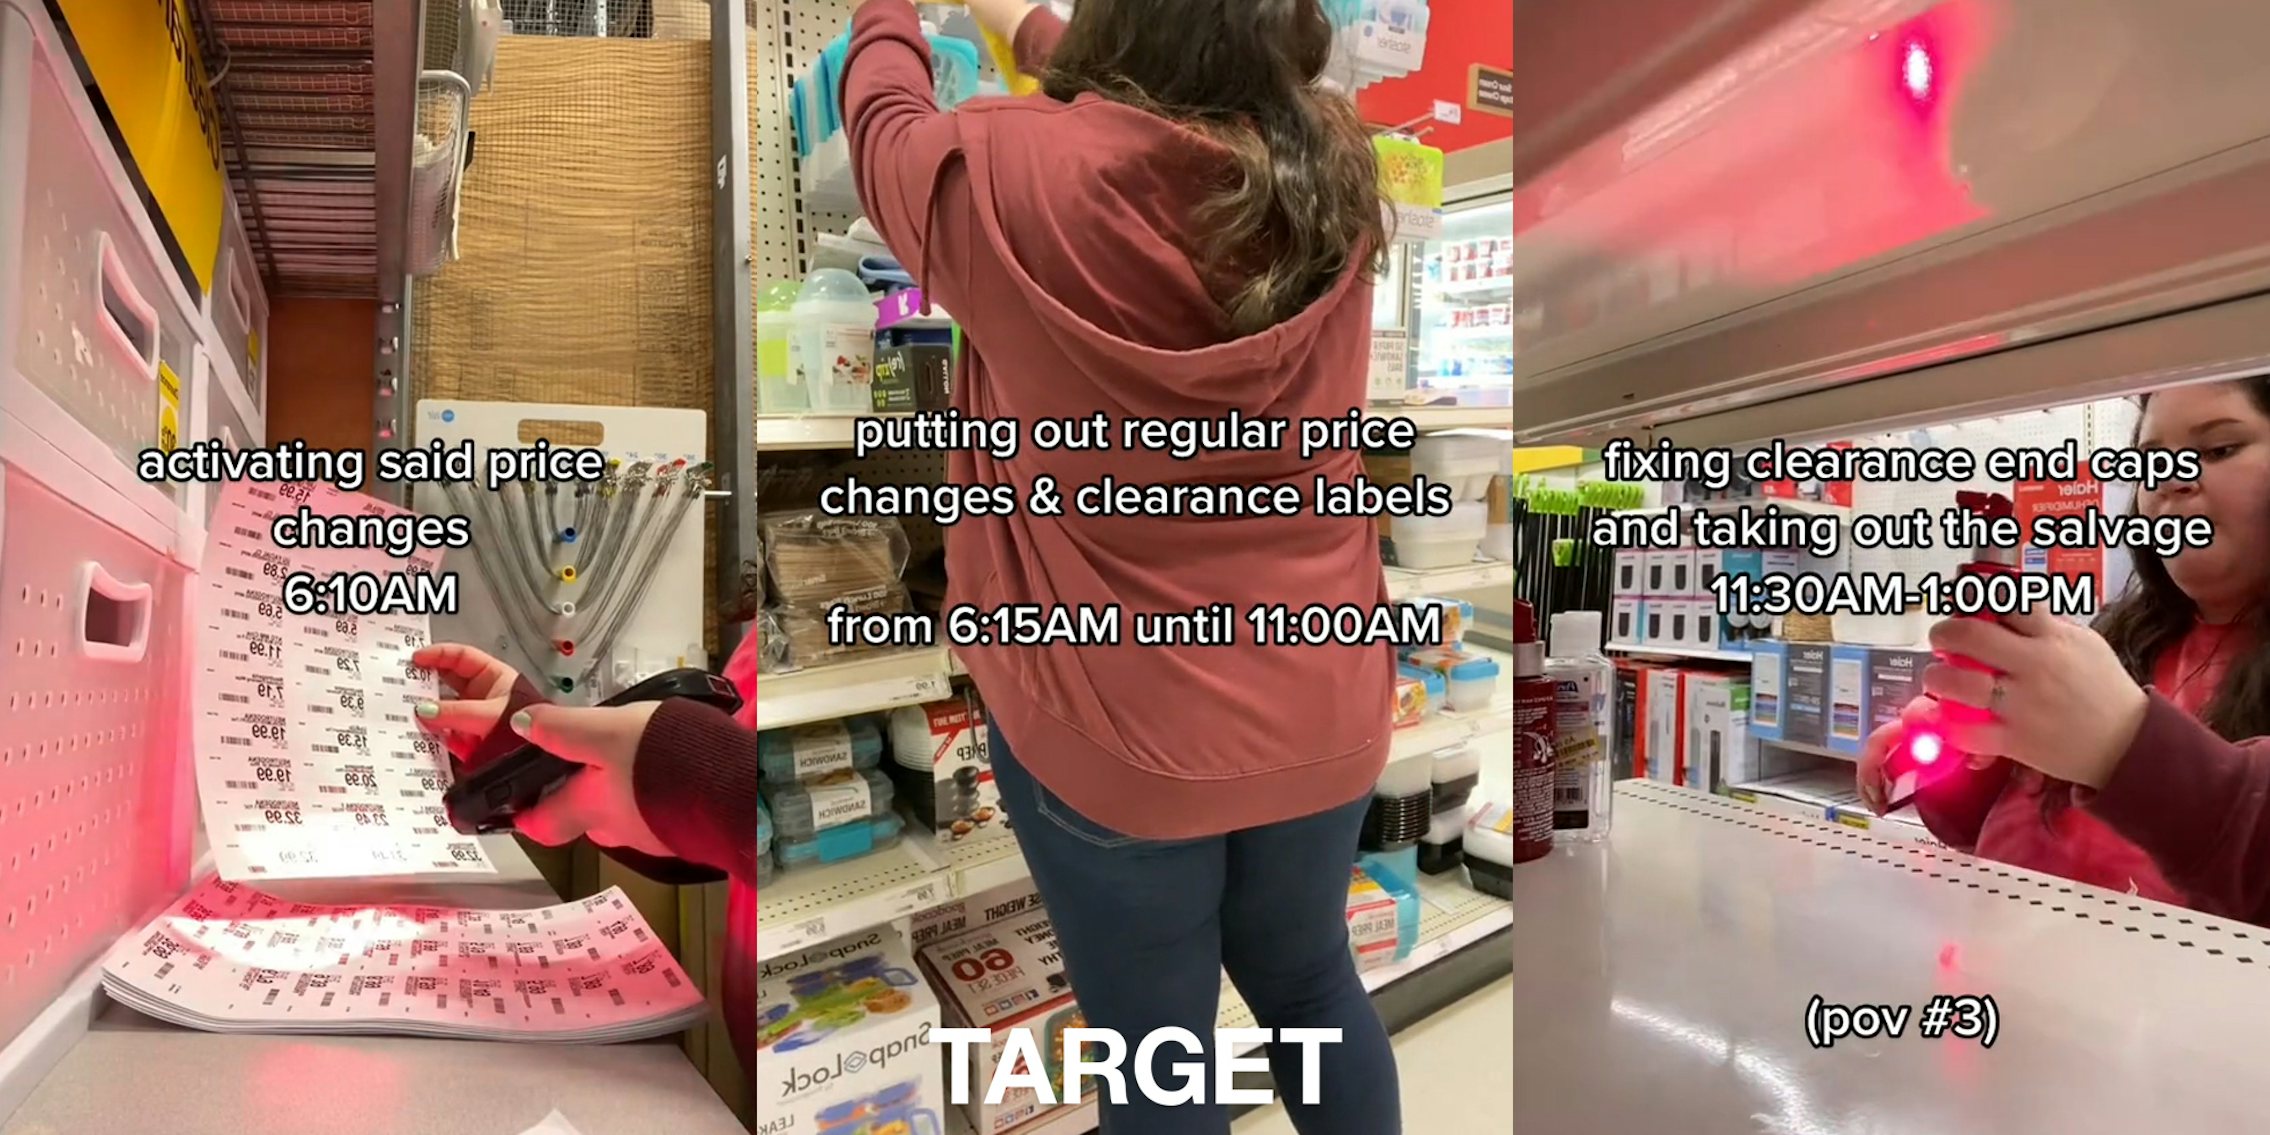 Target employee using scanner on price changes on paper with caption 'activating said price changes 6:10AM' (l) Target employee putting out price change labels with caption 'putting out regular price changes & clearance labels from 6:15AM until 11:00AM' with Target logo at the bottom (c) Target employee fixing clearance section with caption 'fixing clearance end caps and taking out the salvage 11:30AM-1:00PM' (r)